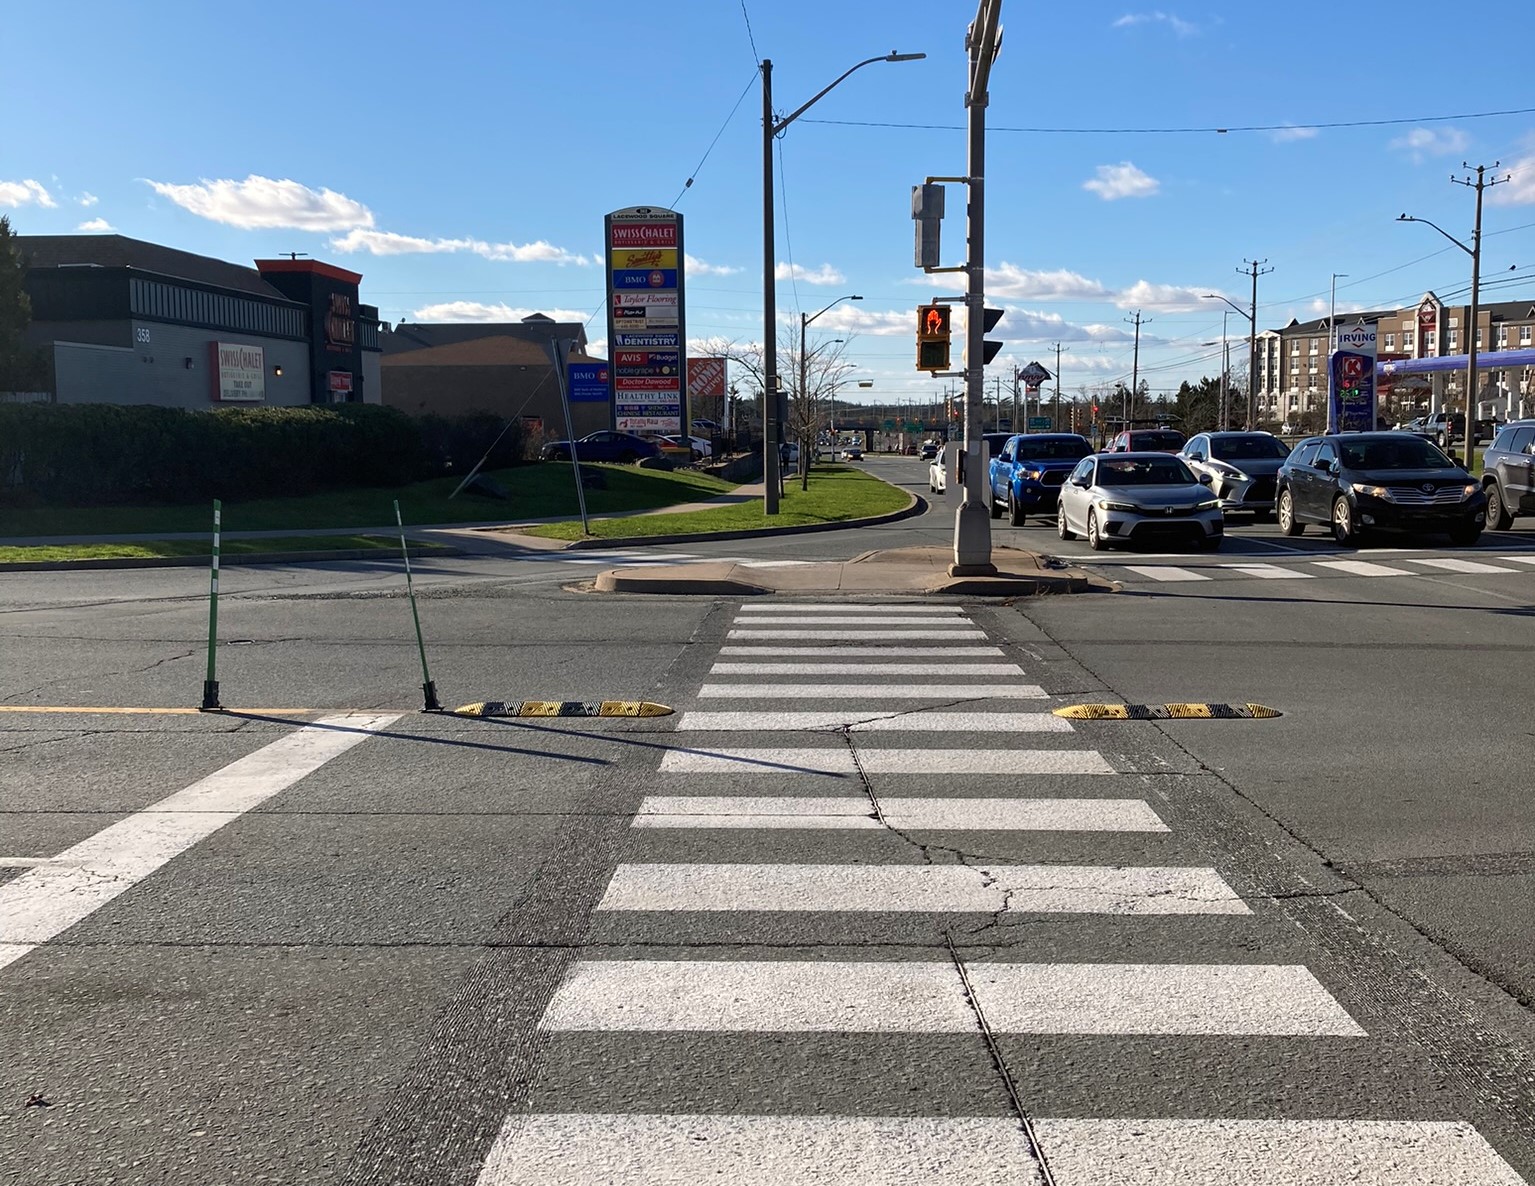 Looking straight across a crosswalk at an intersection, small speed bumps to calm left turns are shown on both sides of the crosswalk